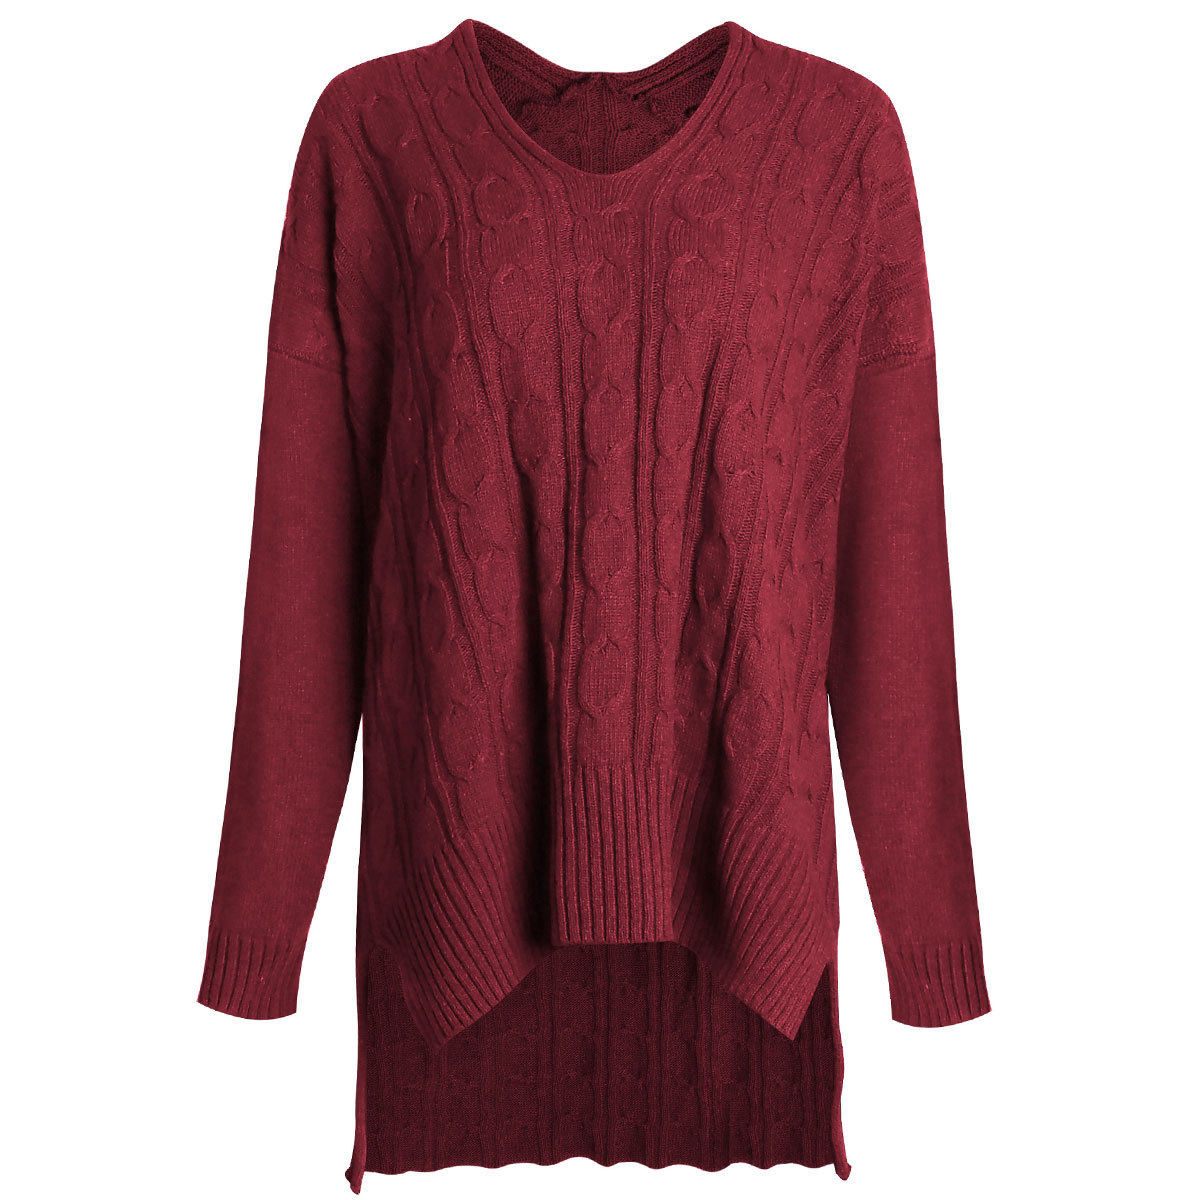 Design Fashion V Neck High Low Pullover Sweater For Women Am114 - Wine Red